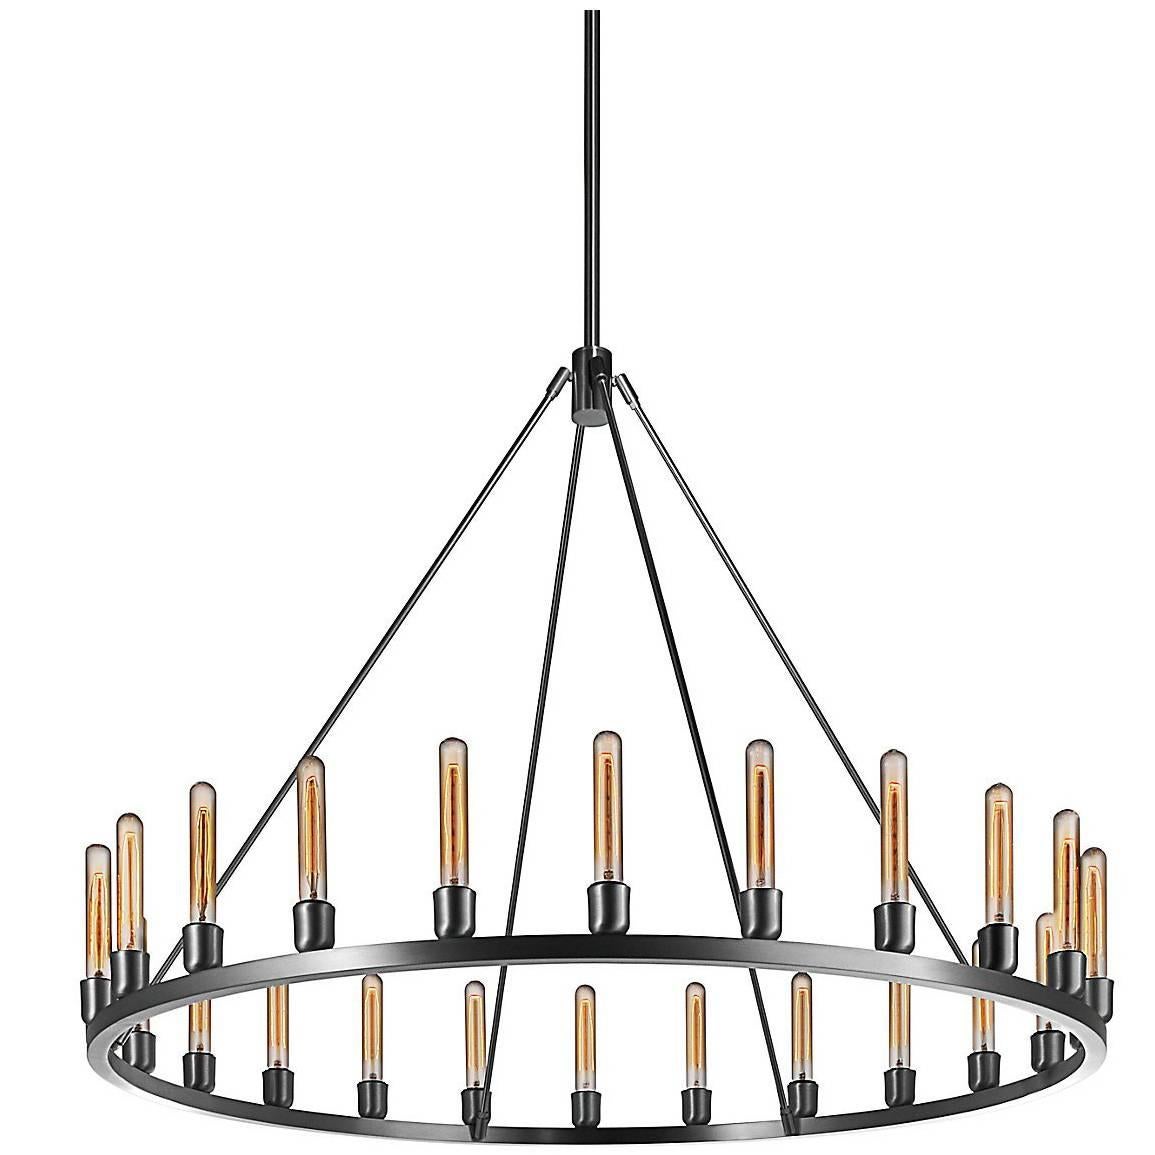 Spark Modern Polished Nickel Chandelier Light, Made in the USA